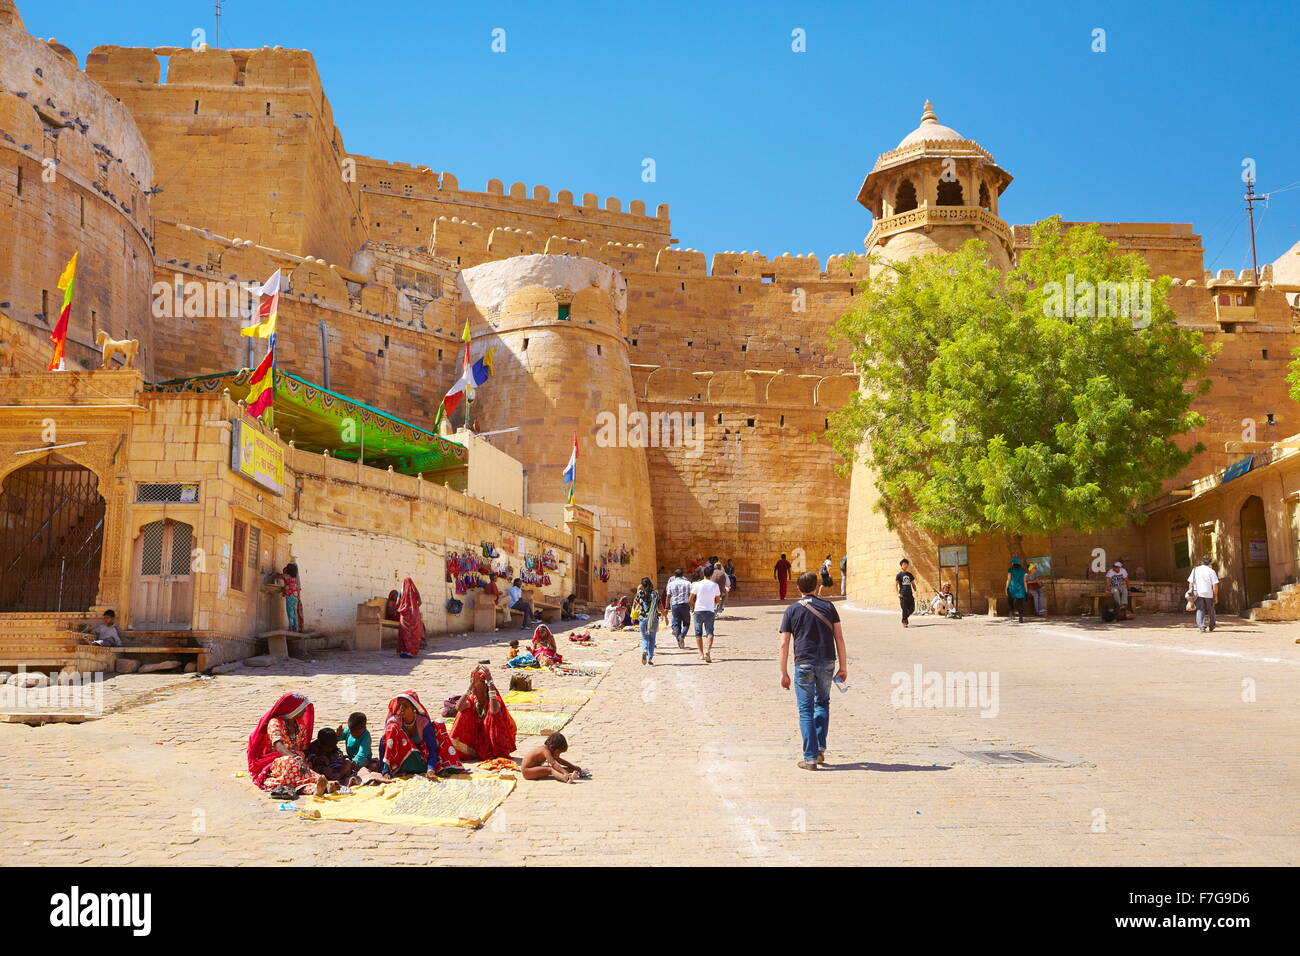 The entrance gate leads to the Jaisalmer Fort, Jaisalmer, Rajasthan, India Stock Photo